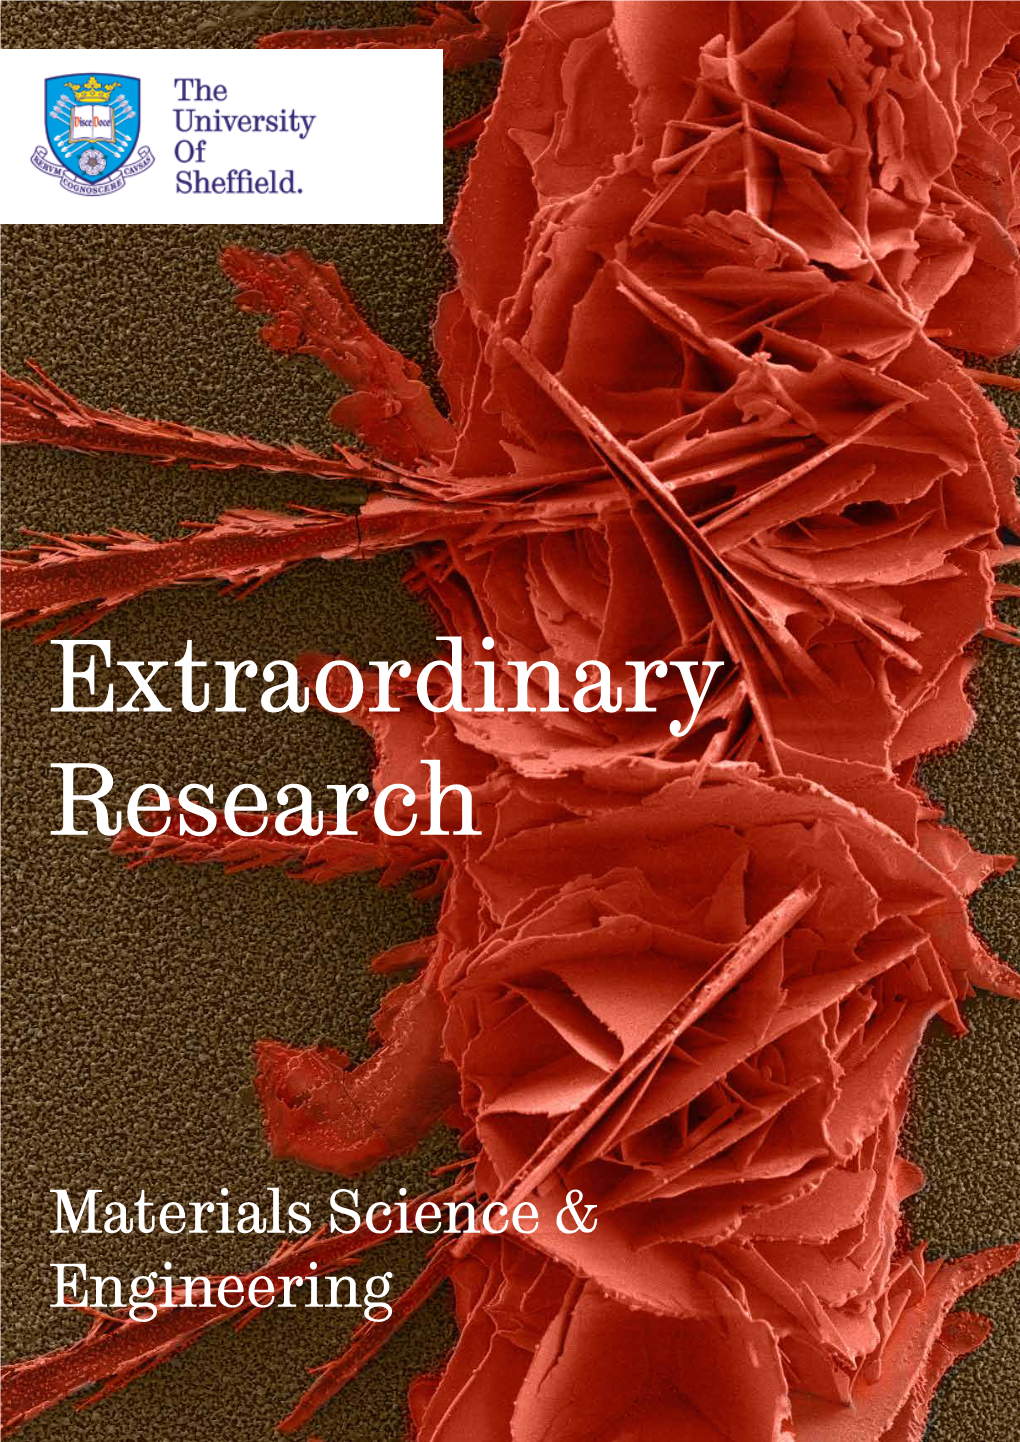 Download the Materials Research Brochure